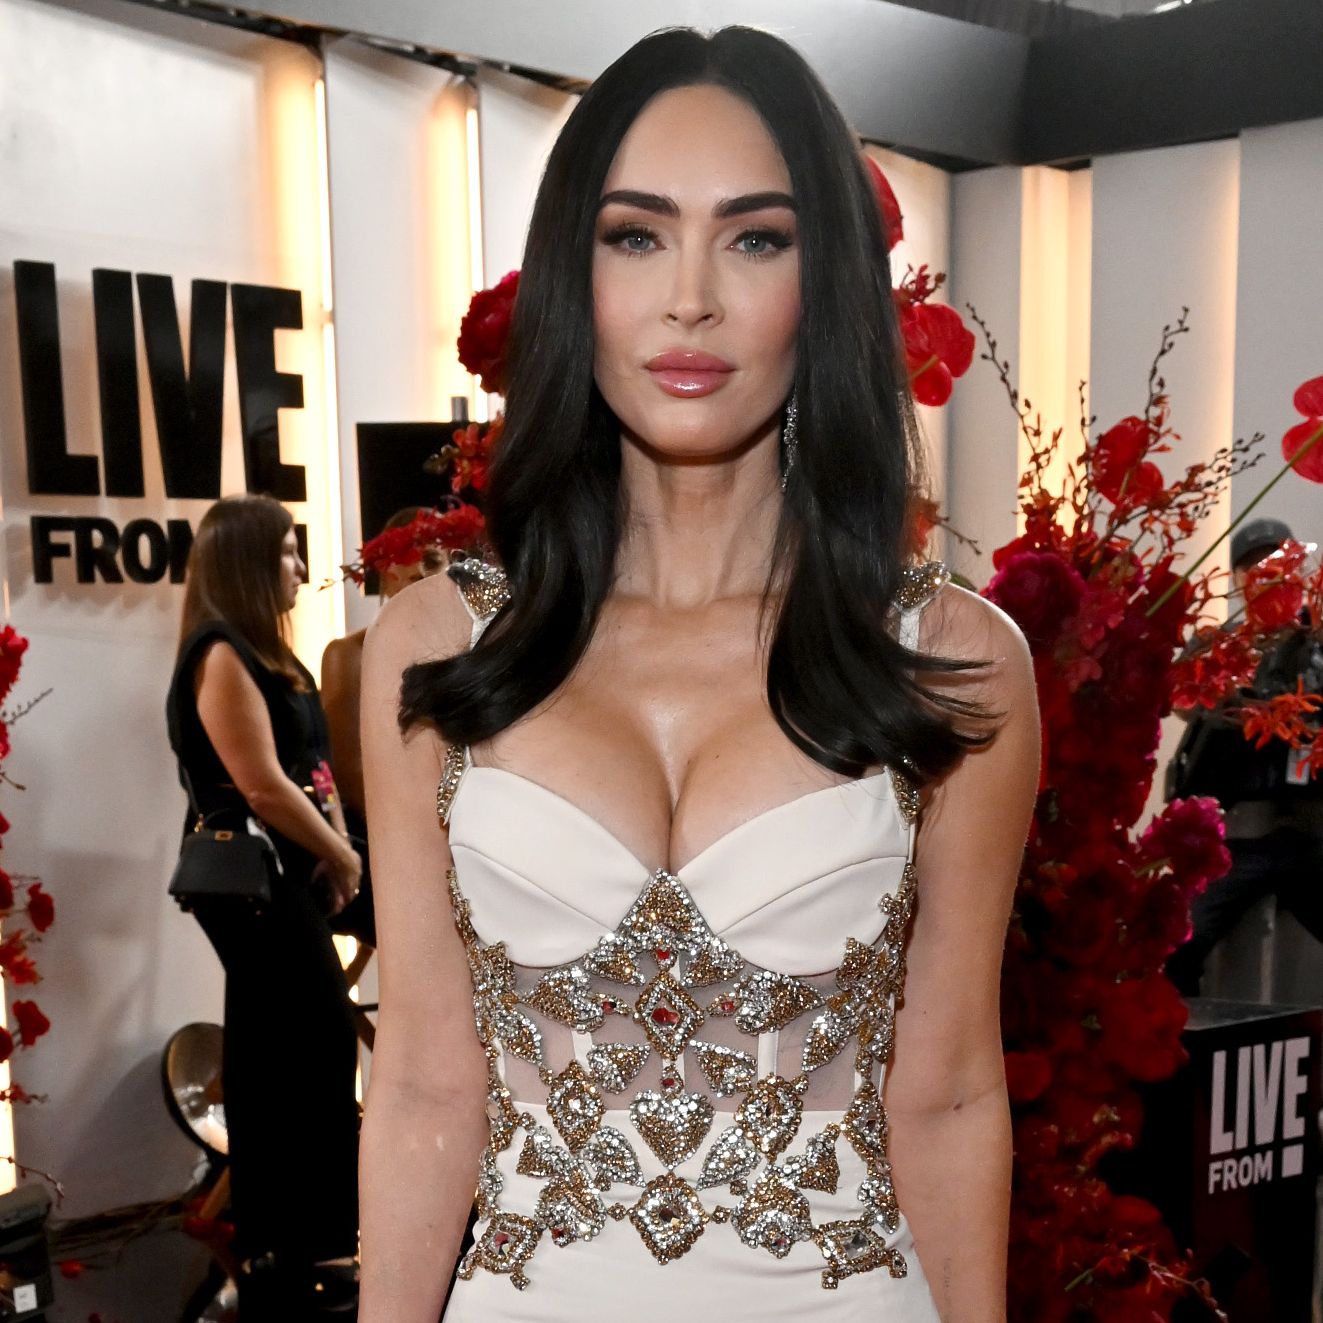 charlotte herzog recommends nude photos of megan fox pic